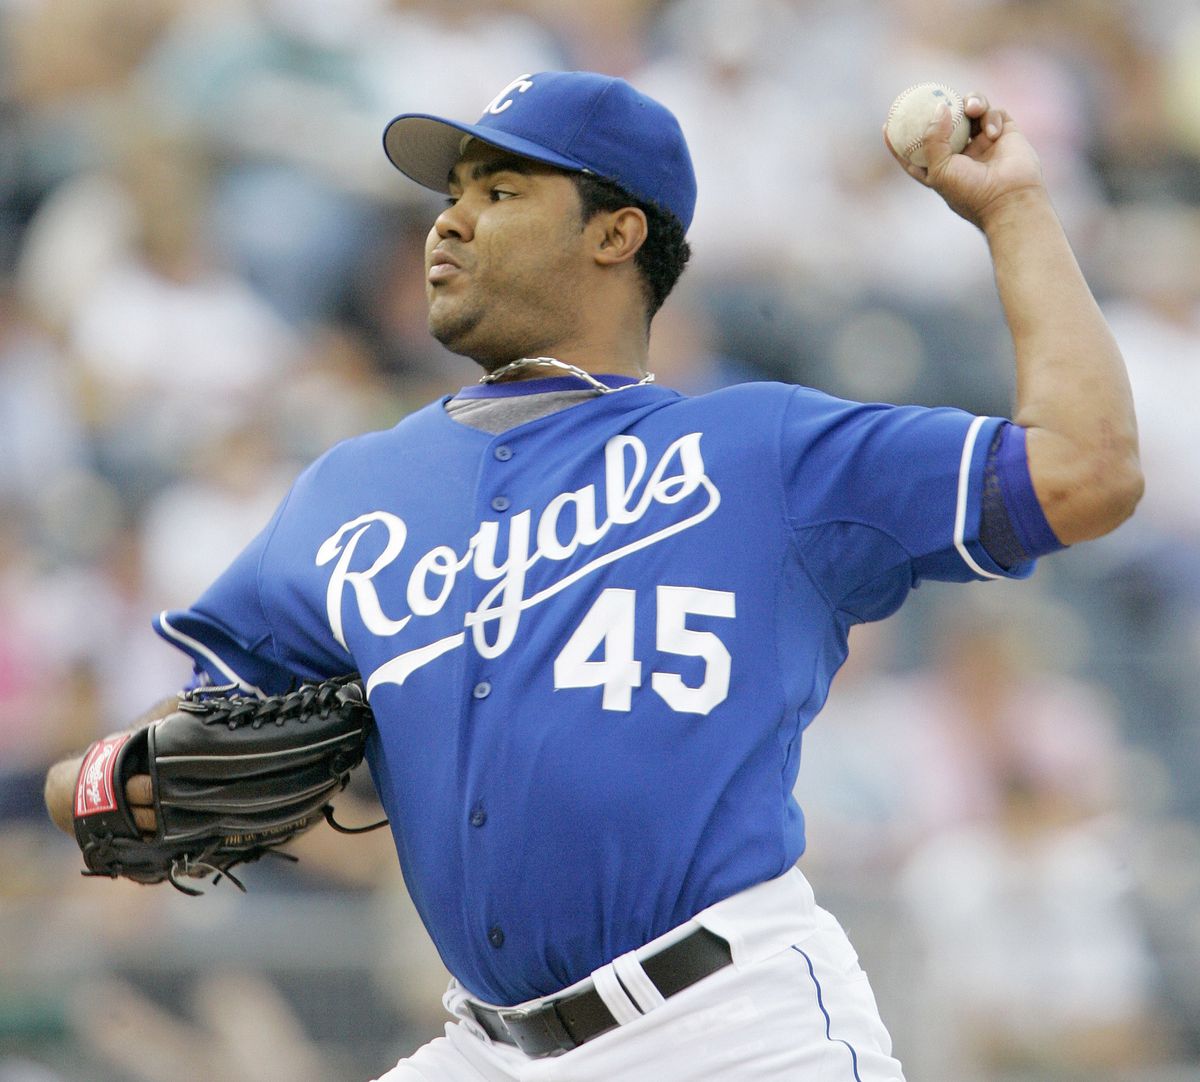 Kansas City Royals pitcher Odalis Perez throws in the first